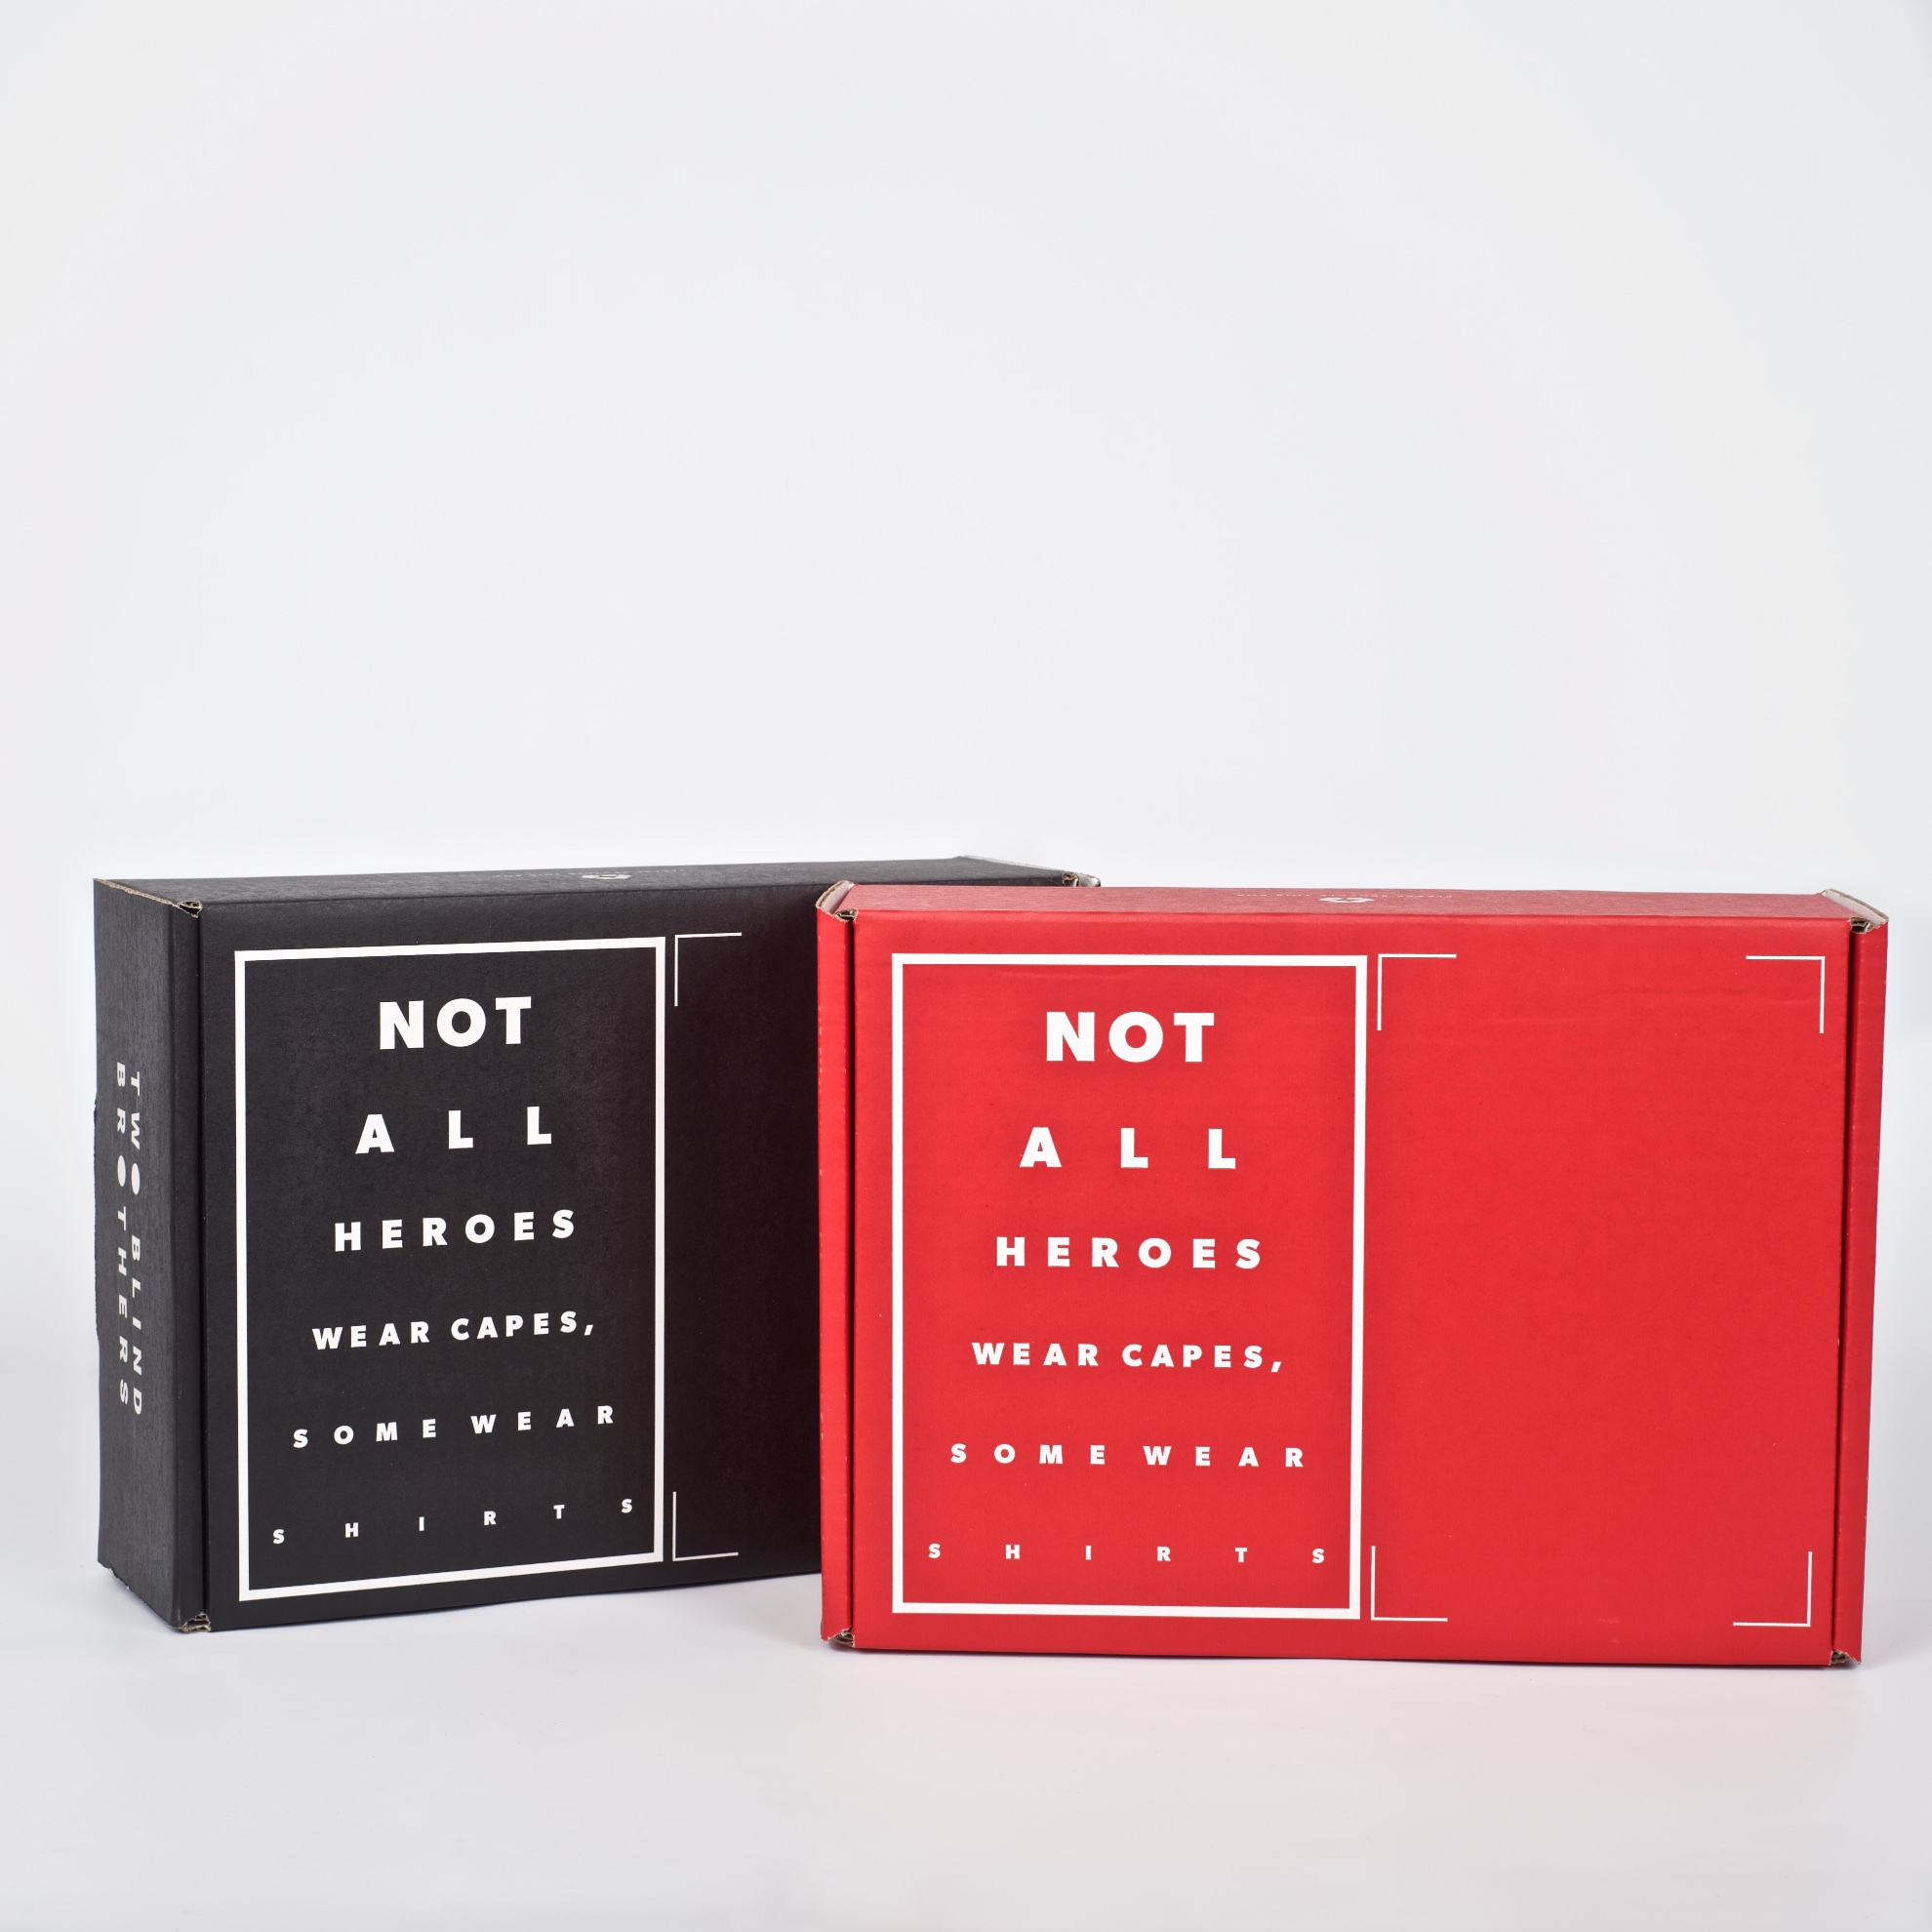 DTC Packaging for Startup Businesses